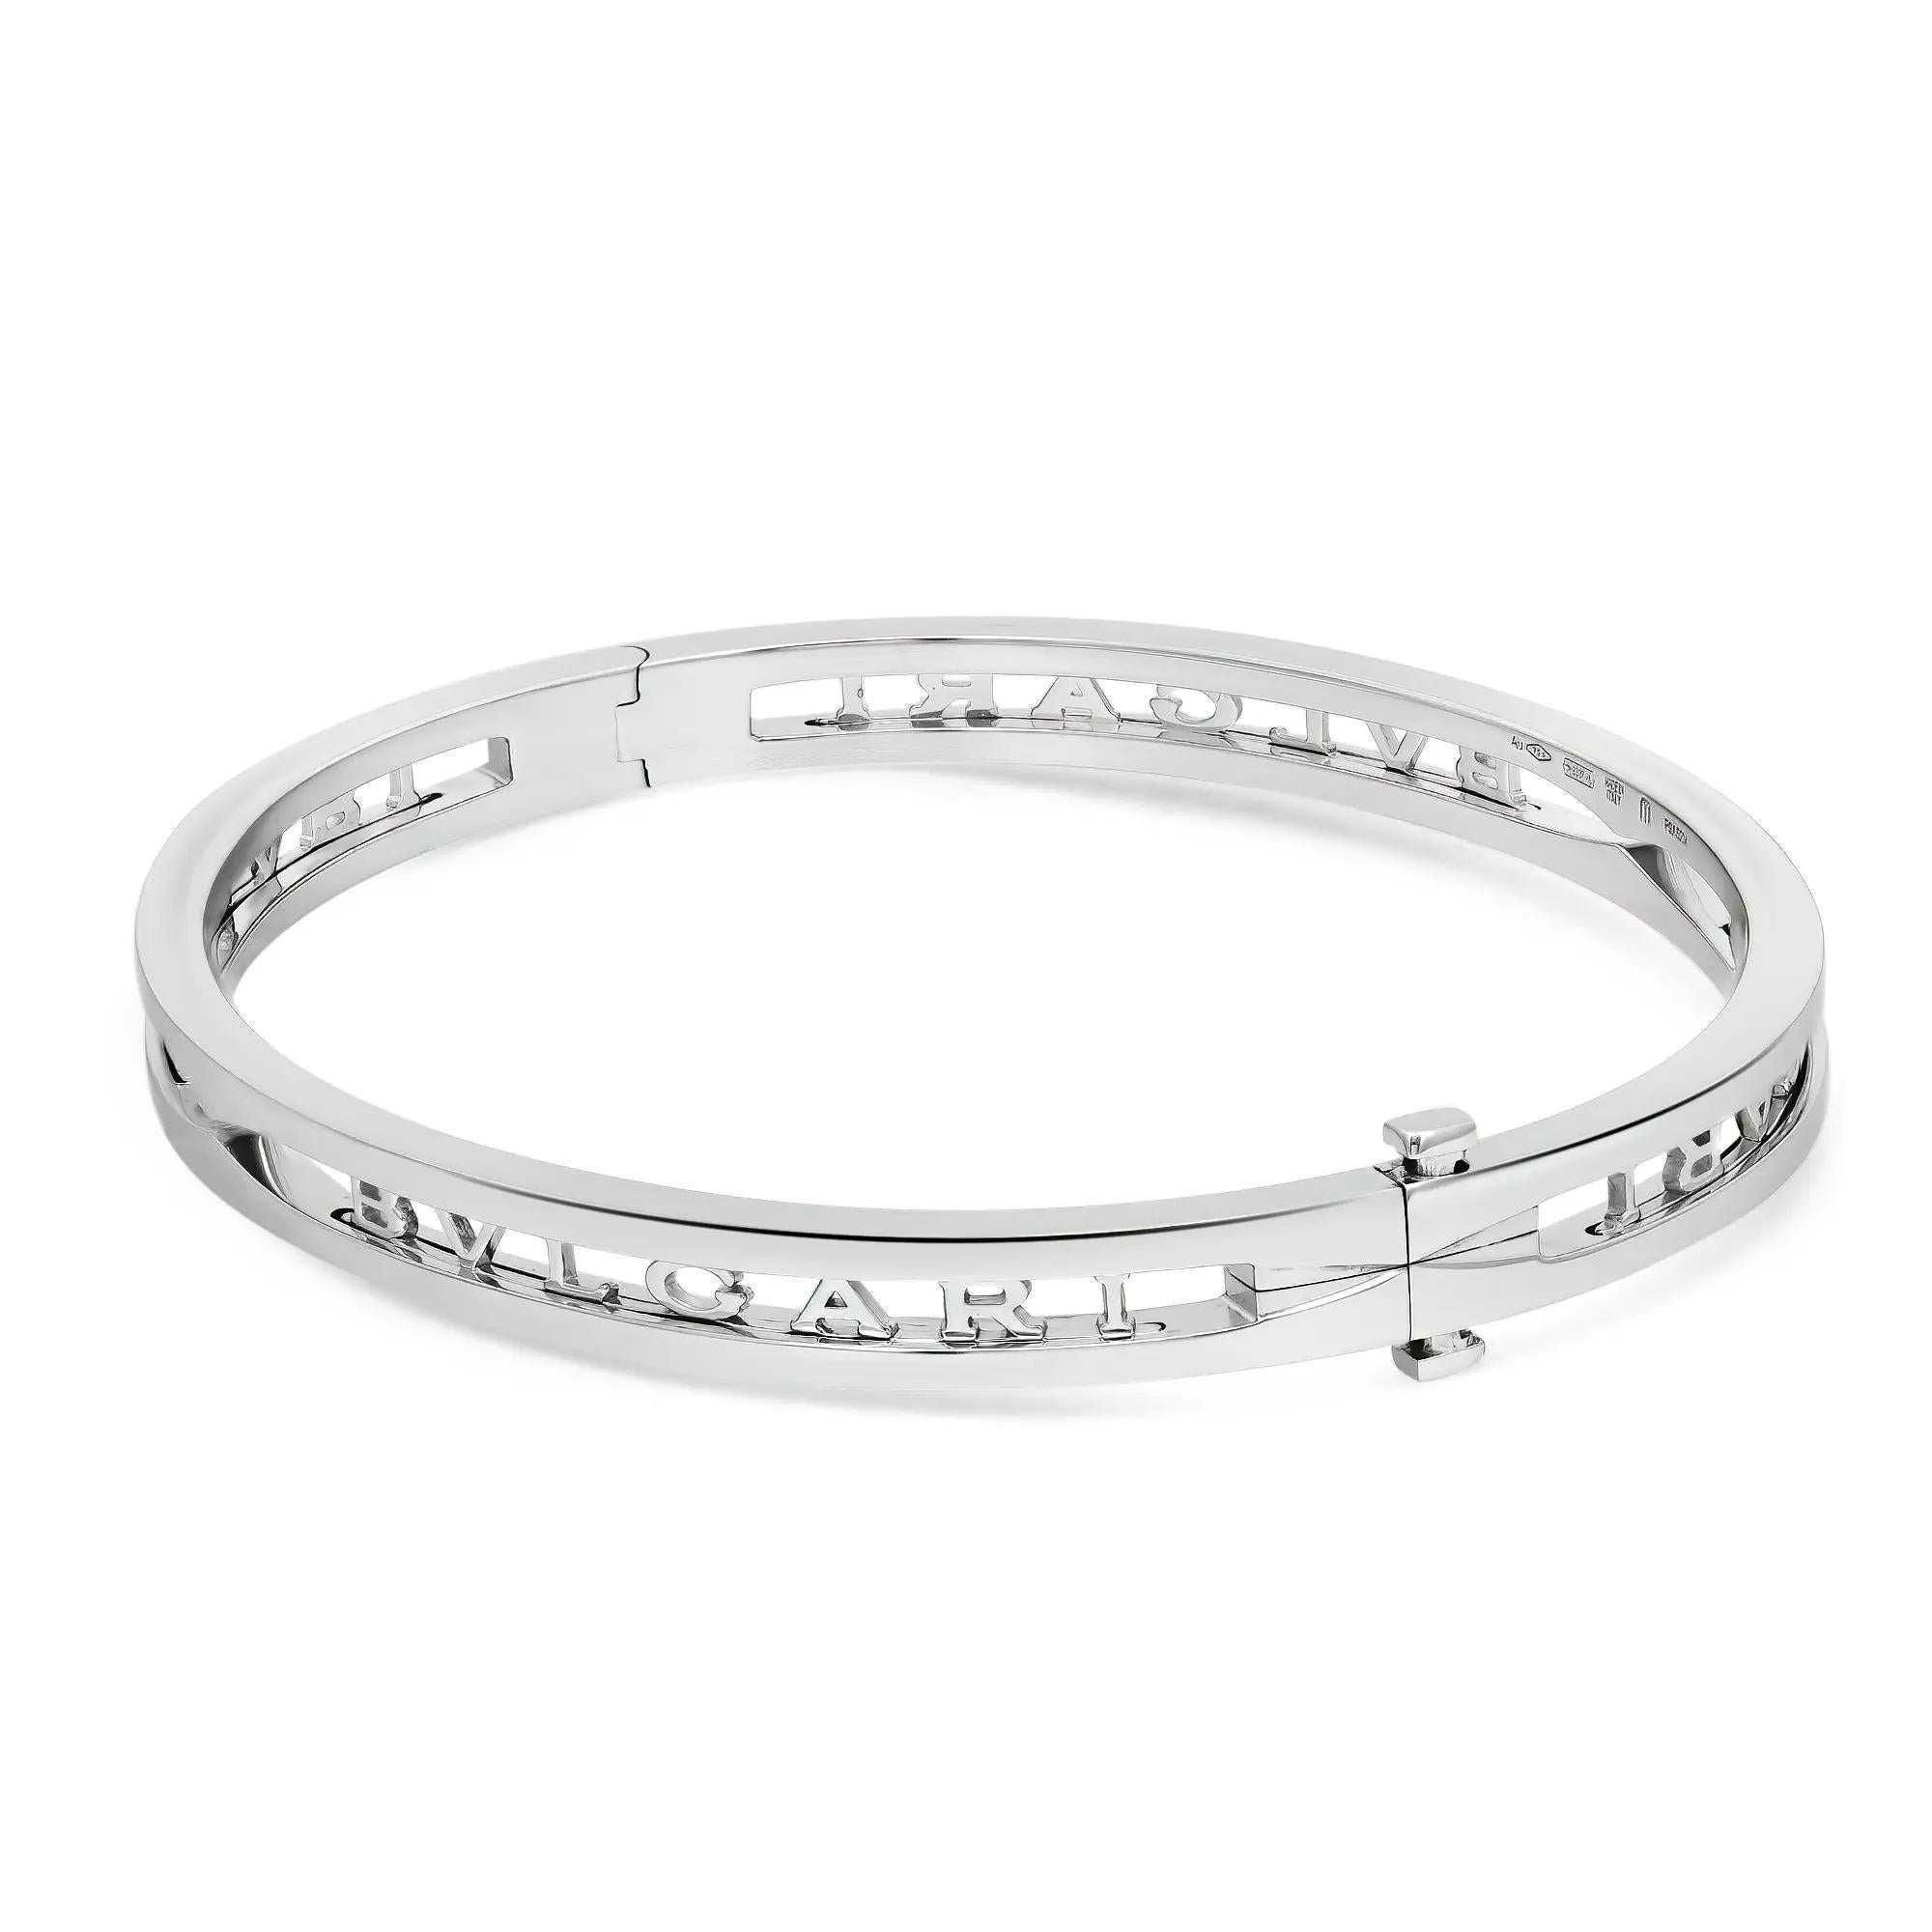 Bold and beautiful, this bracelet is a true essence of jewelry aesthetics. Crafted in lustrous 18K white gold. This bracelet features an oval-shaped bangle with the Bvlgari logo cut out. Super stackable and easy to wear. Size: Medium ( fits up to 7